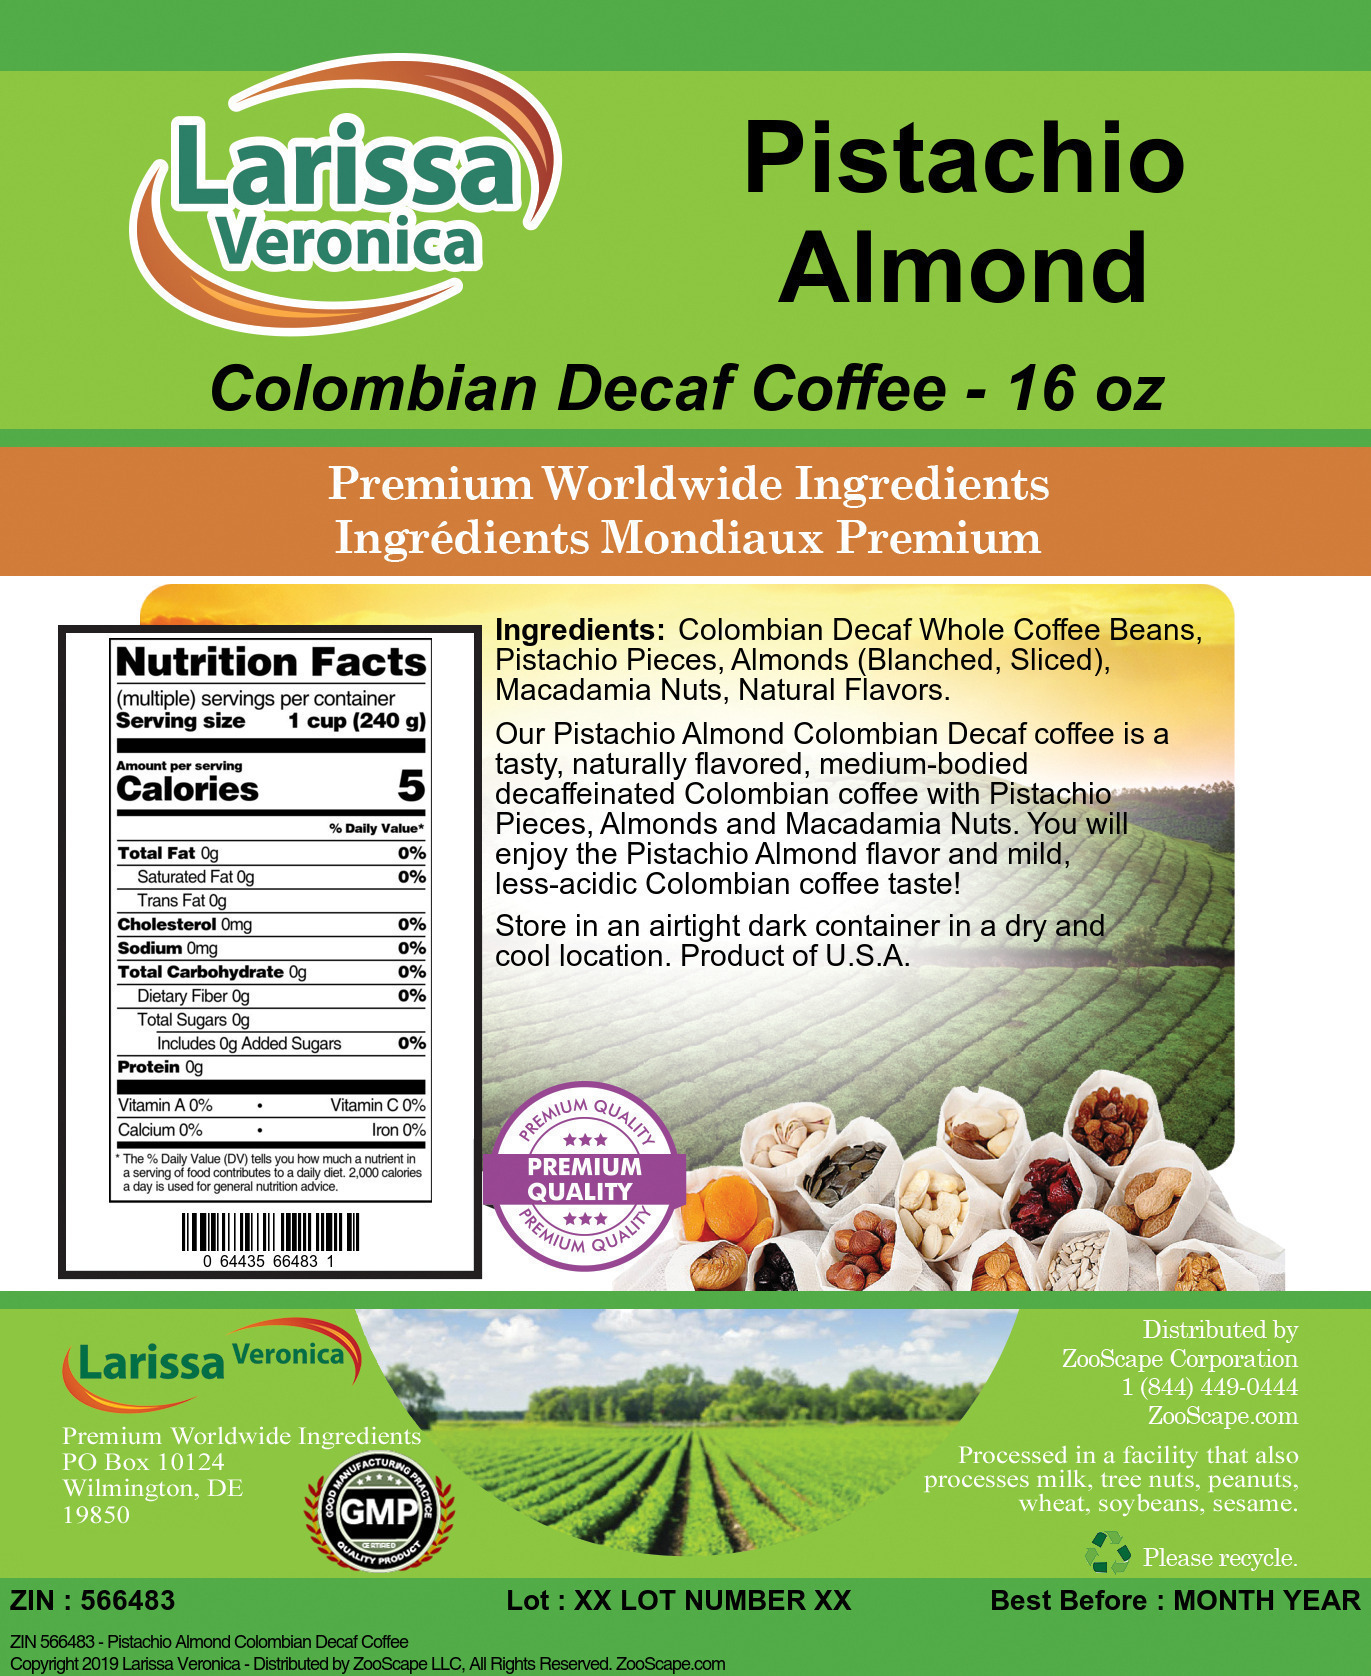 Pistachio Almond Colombian Decaf Coffee - Label